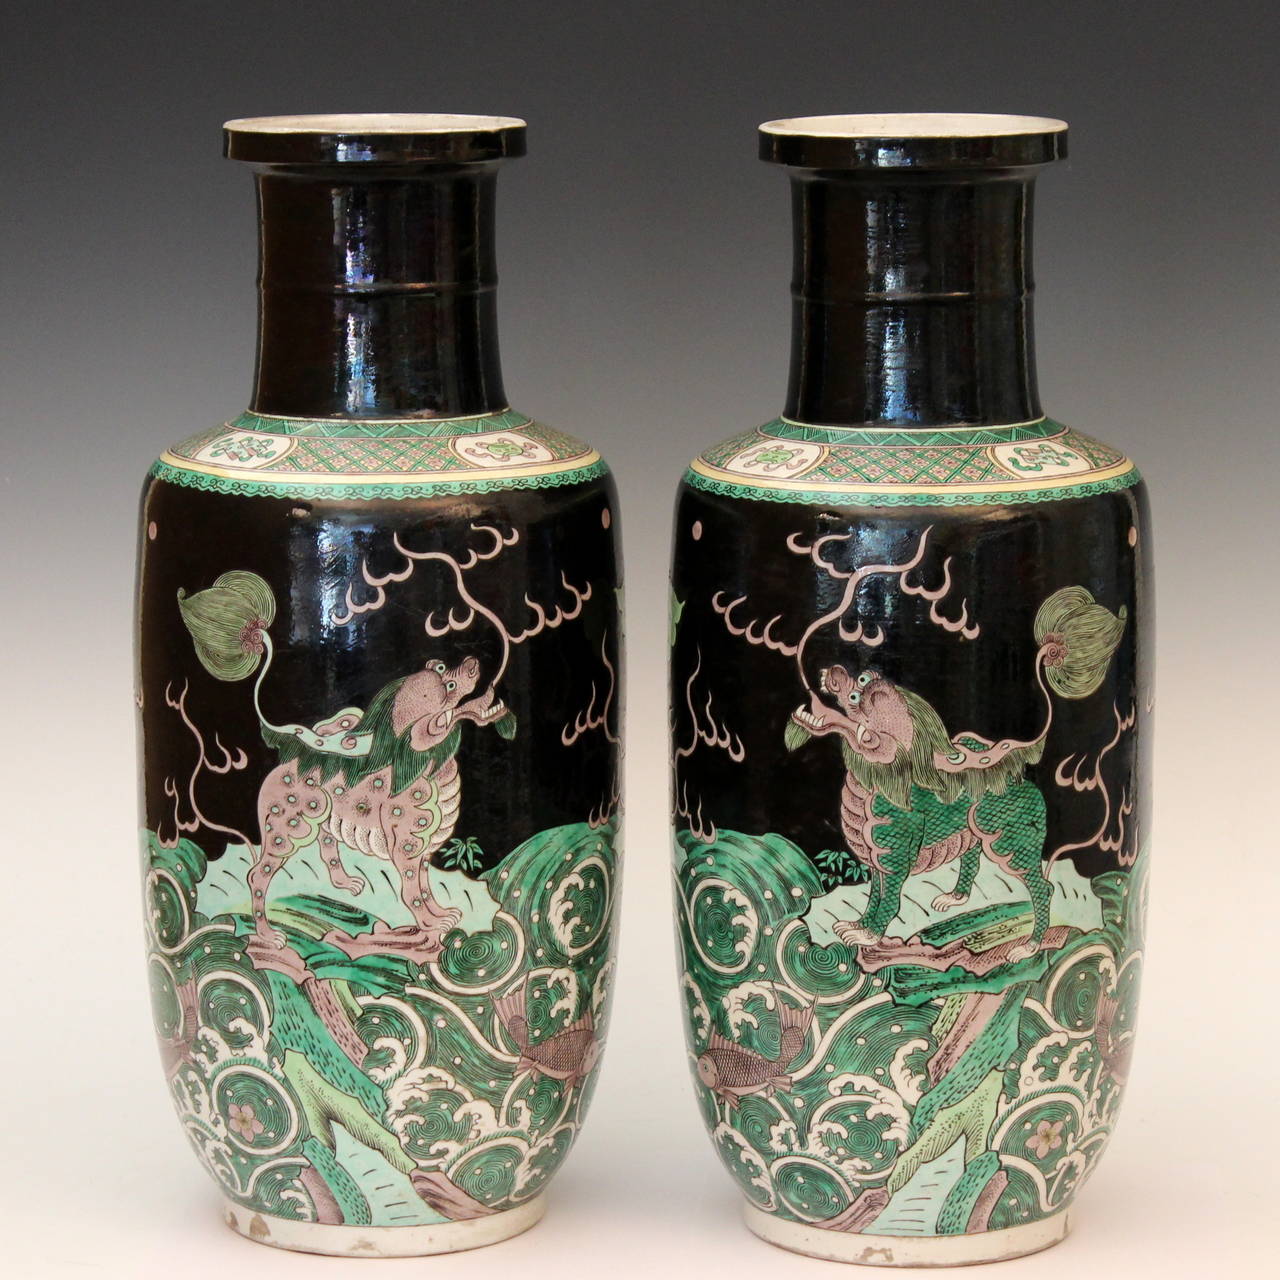 Good quality large matched pair of antique Chinese rouleau vases in Kangxi style famille noire design, circa early 20th century. Very well painted, each with three ferocious looking qilins standing on rocks above the waves, one eating a fish. The